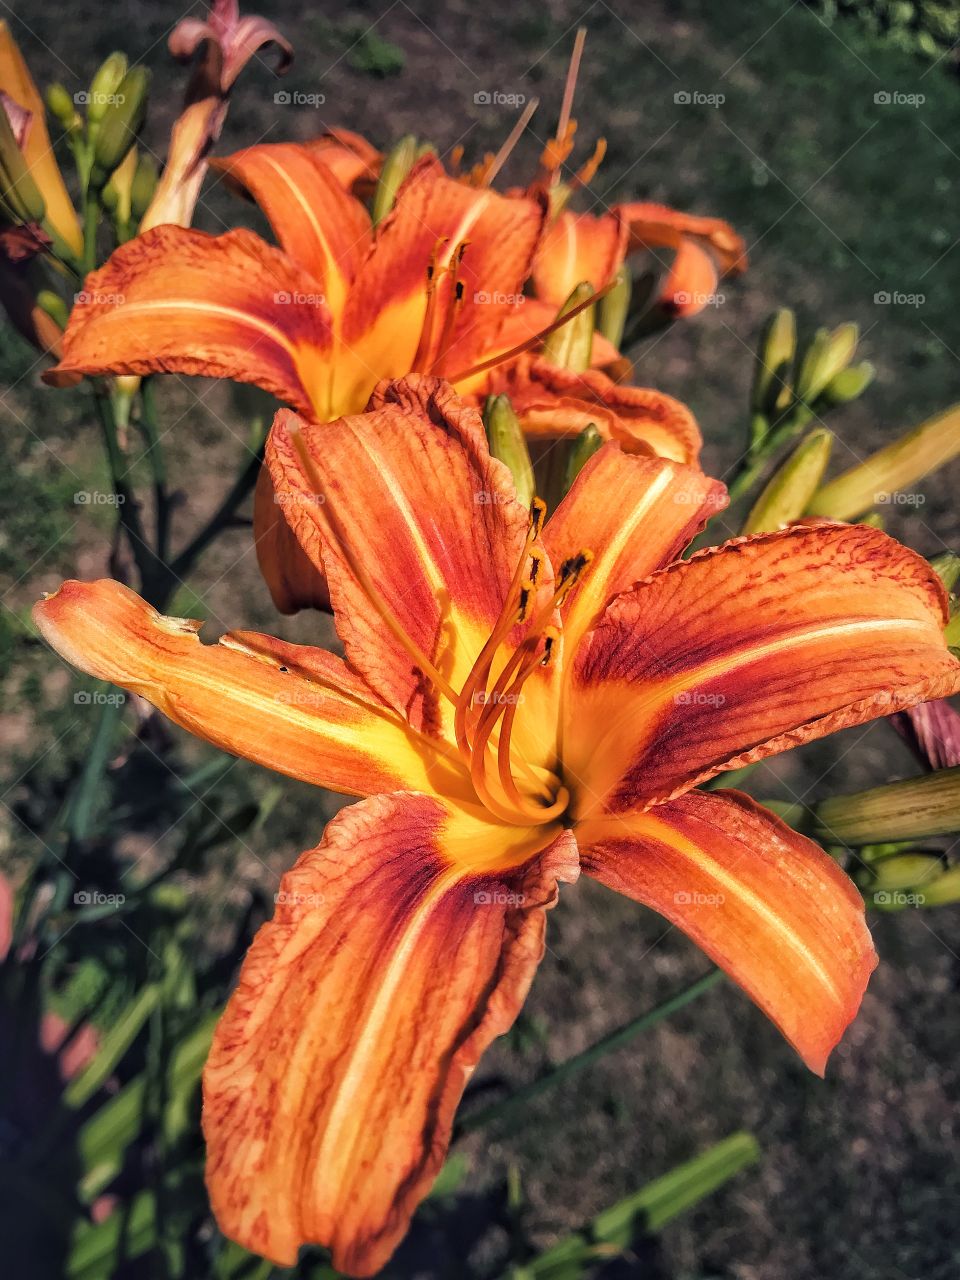 Blooming ditch lilies in my garden 